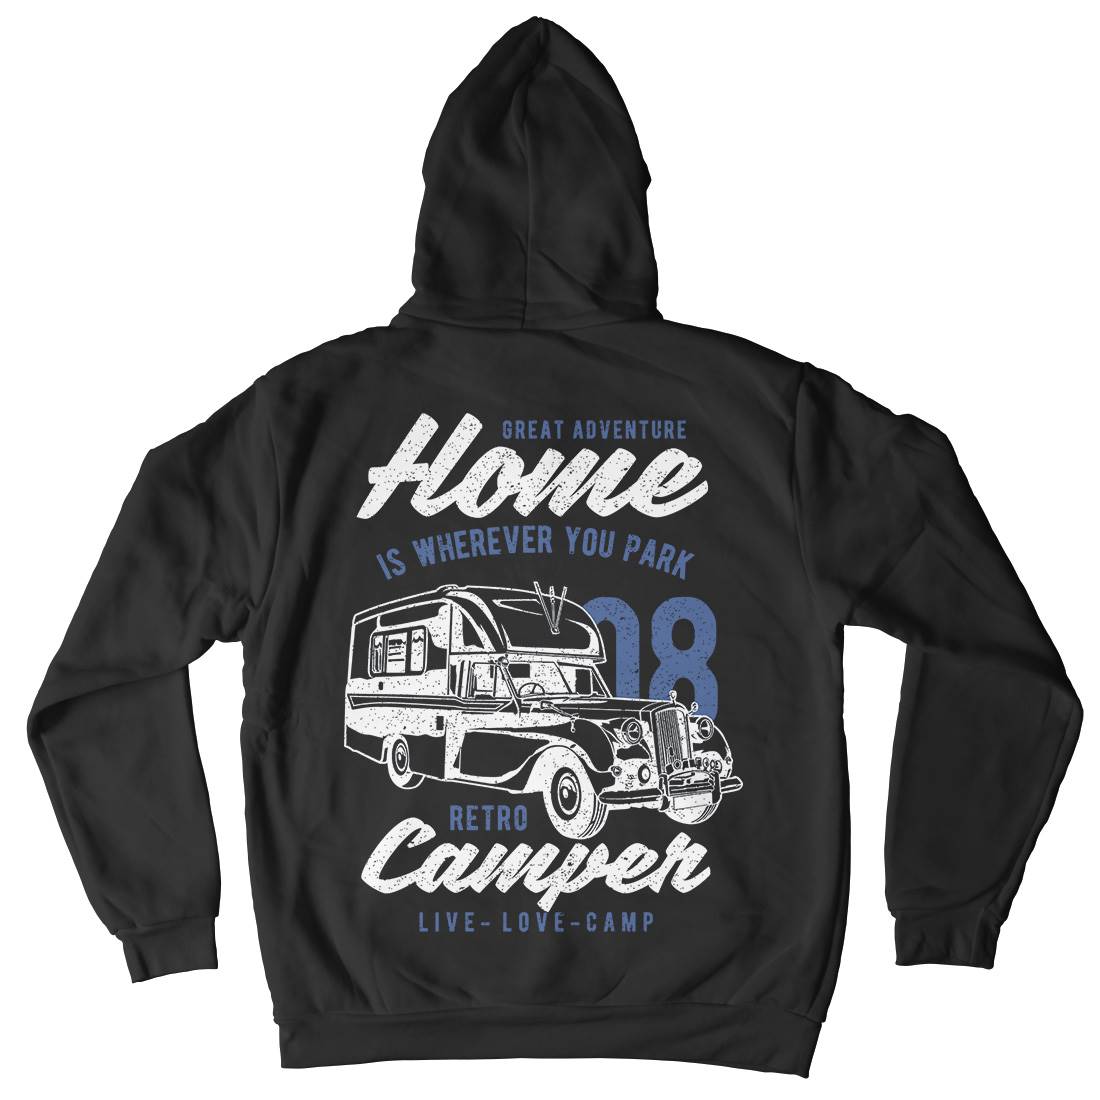 Retro Campers Mens Hoodie With Pocket Nature A740